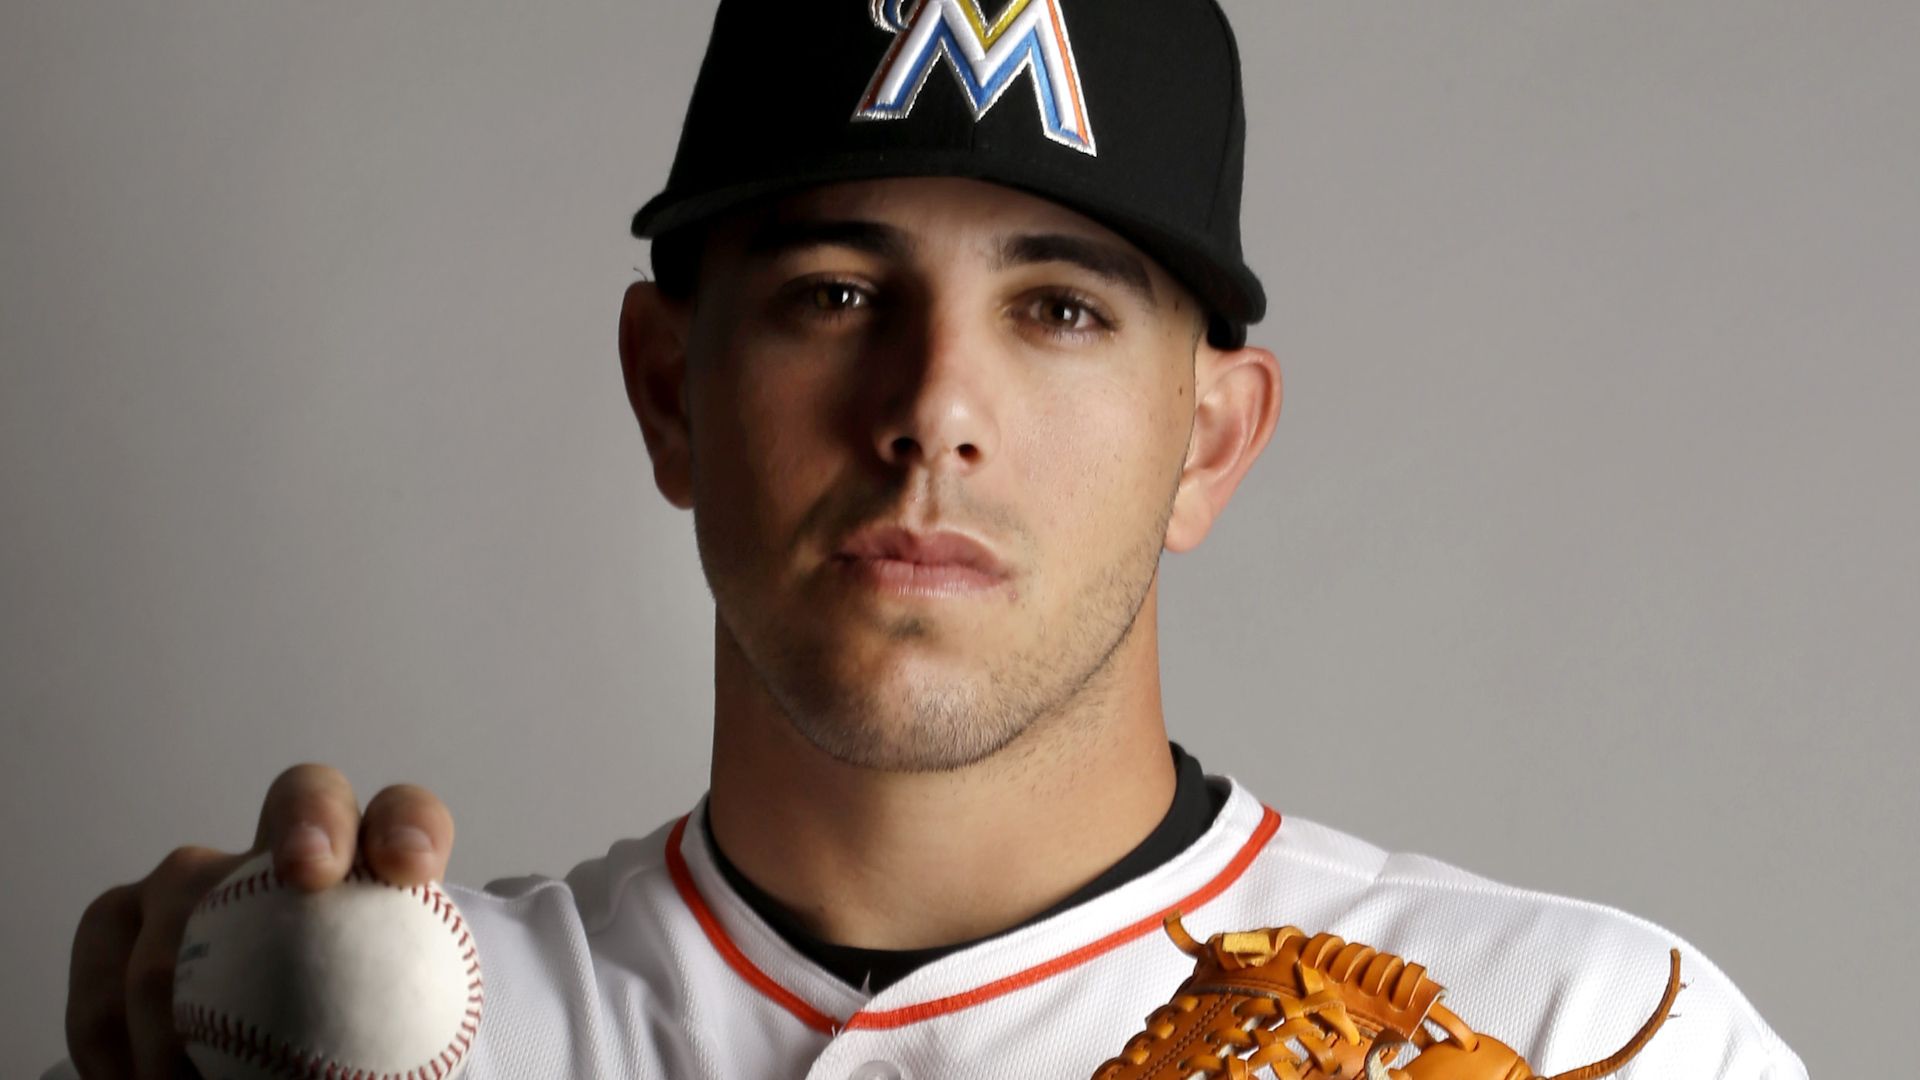 Marlins pitching ace killed in boating accident